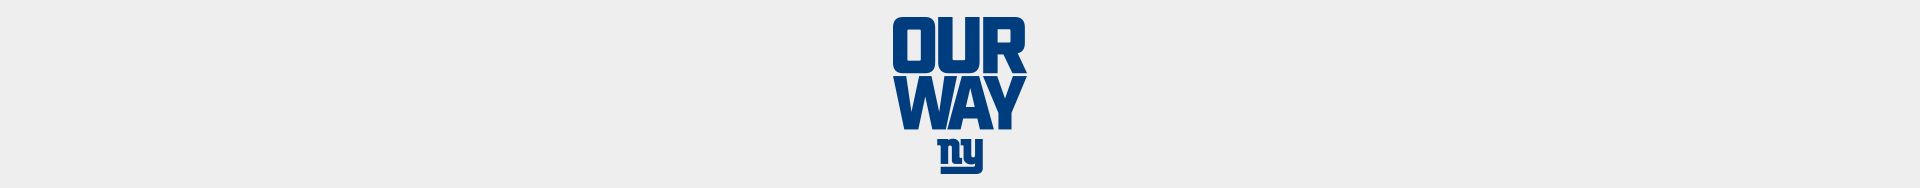 Our Way  New York Giants -  - Giants Launch Our Way